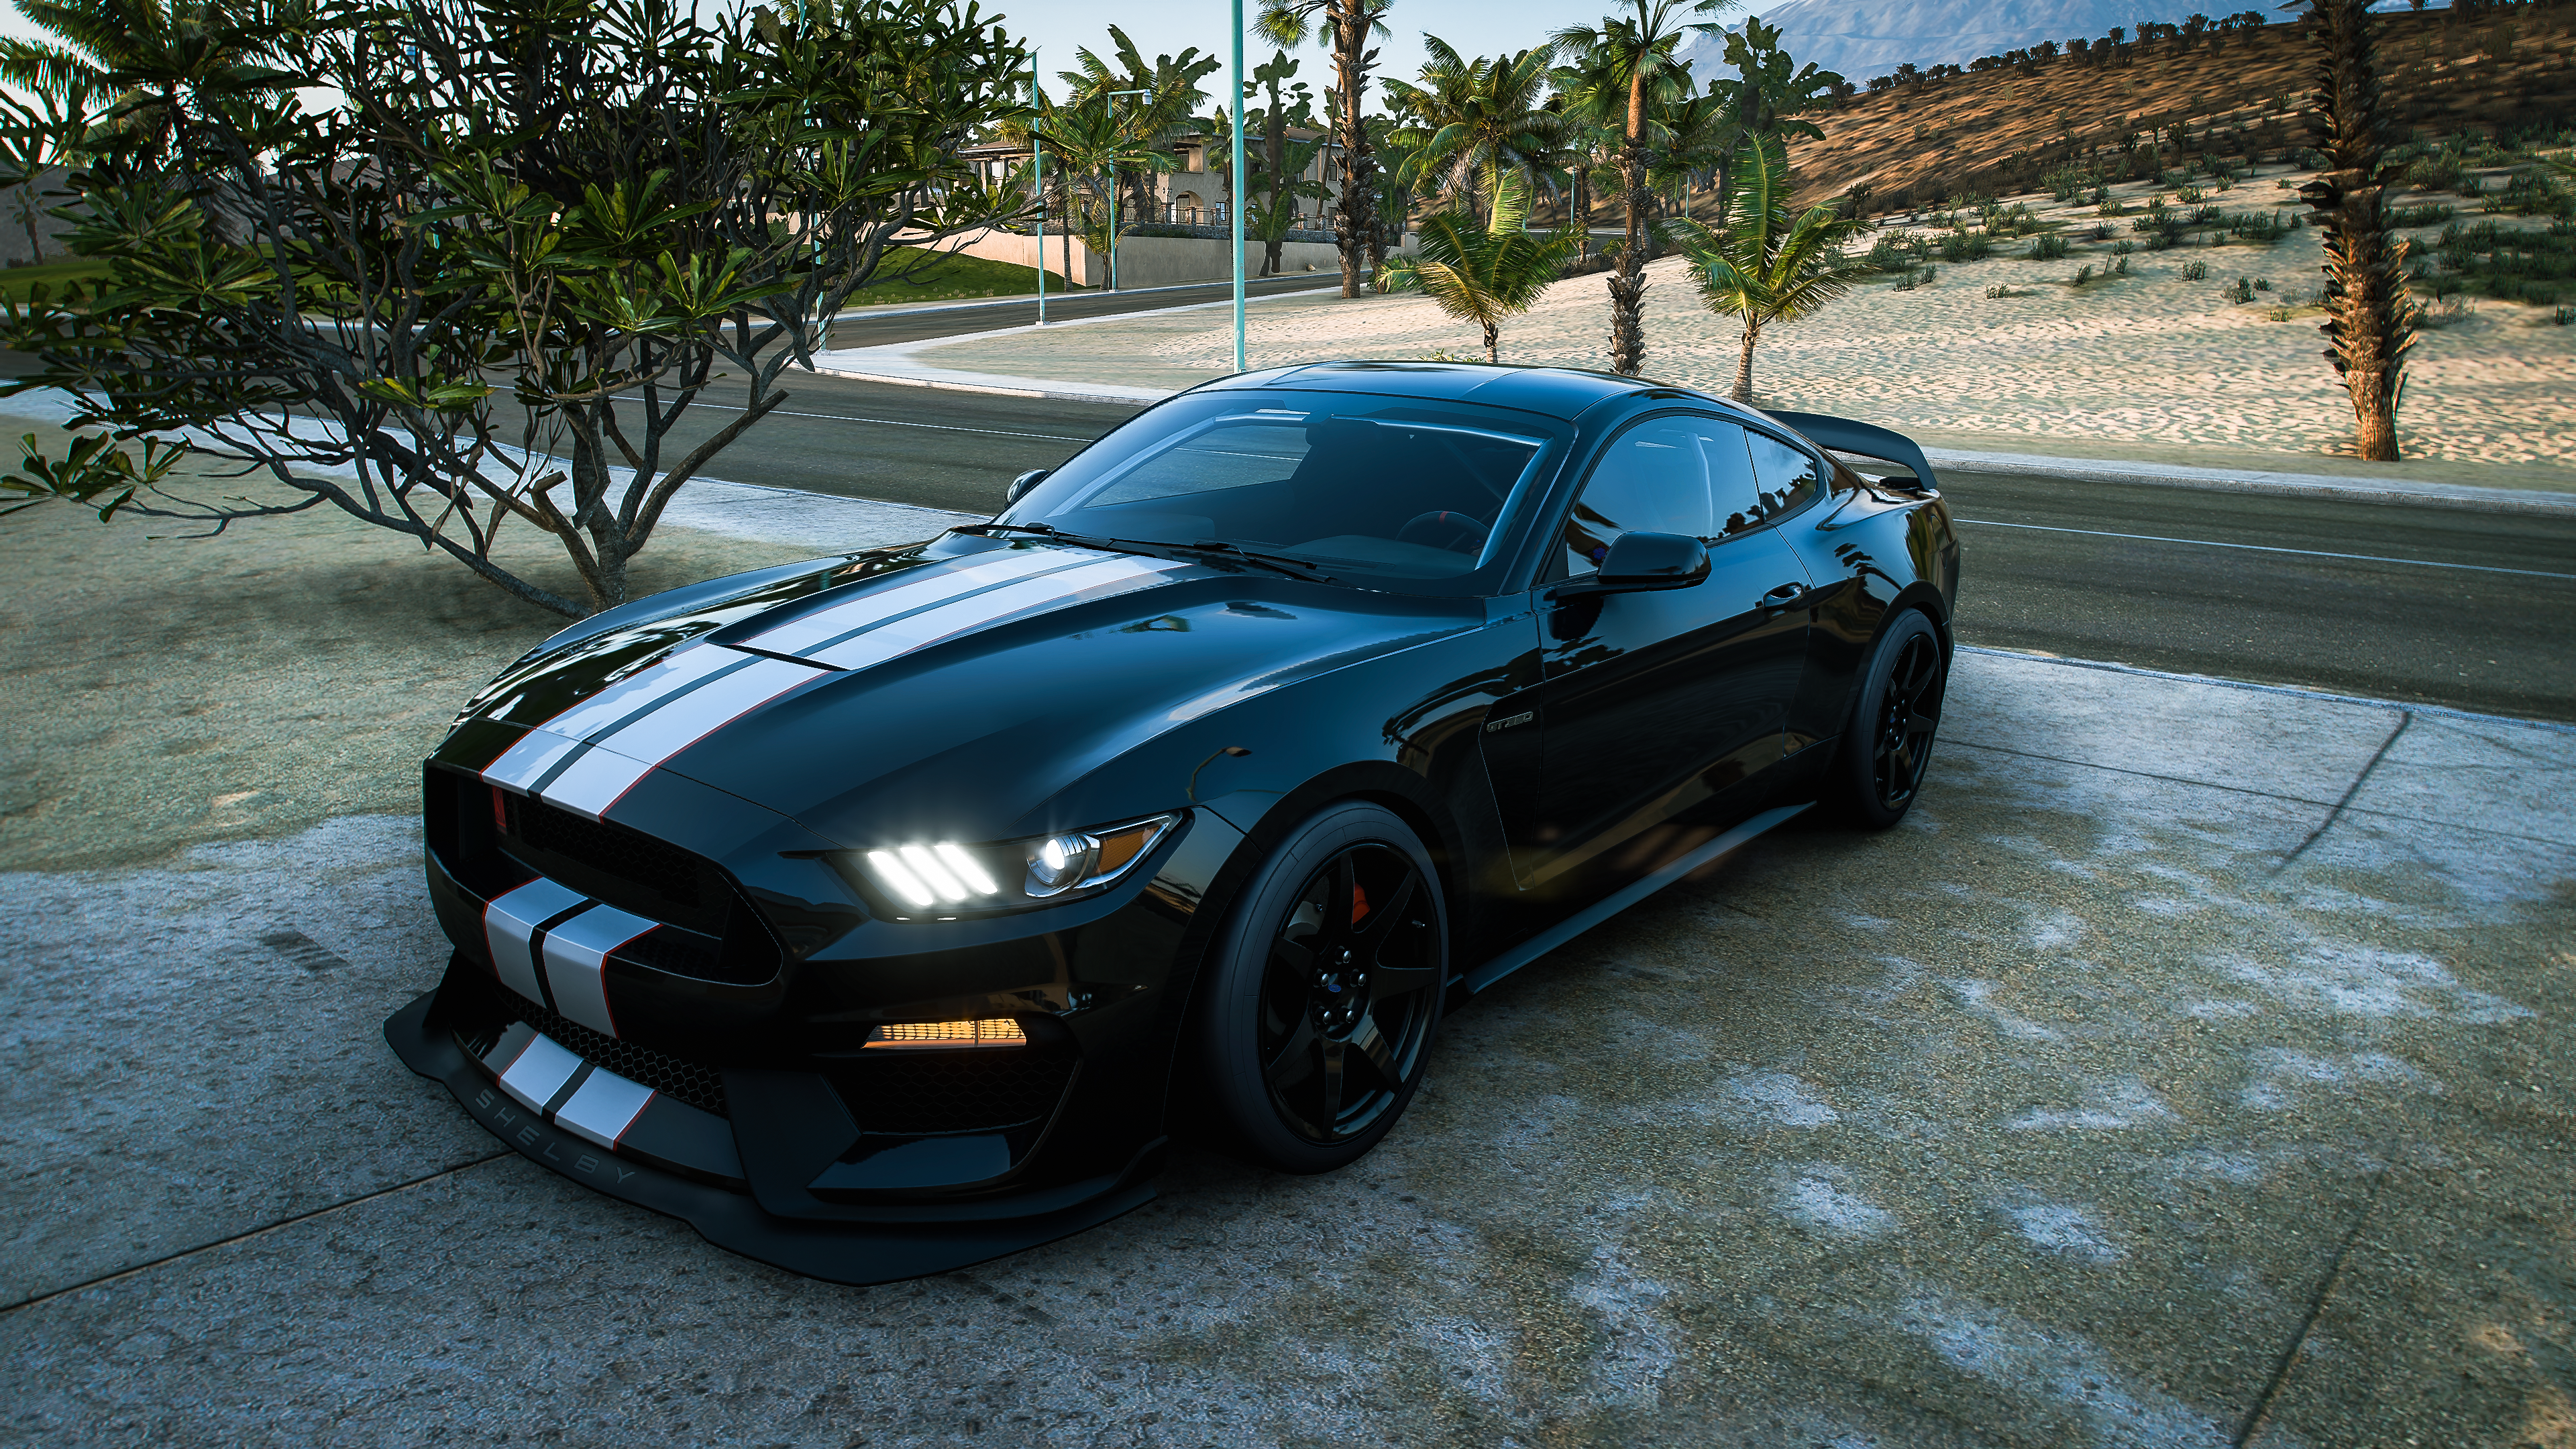 General 3840x2160 Forza Horizon 5 Forza Horizon Forza Ford Shelby race cars video games video game art garage Mexican vehicle headlights CGI car Ford Mustang